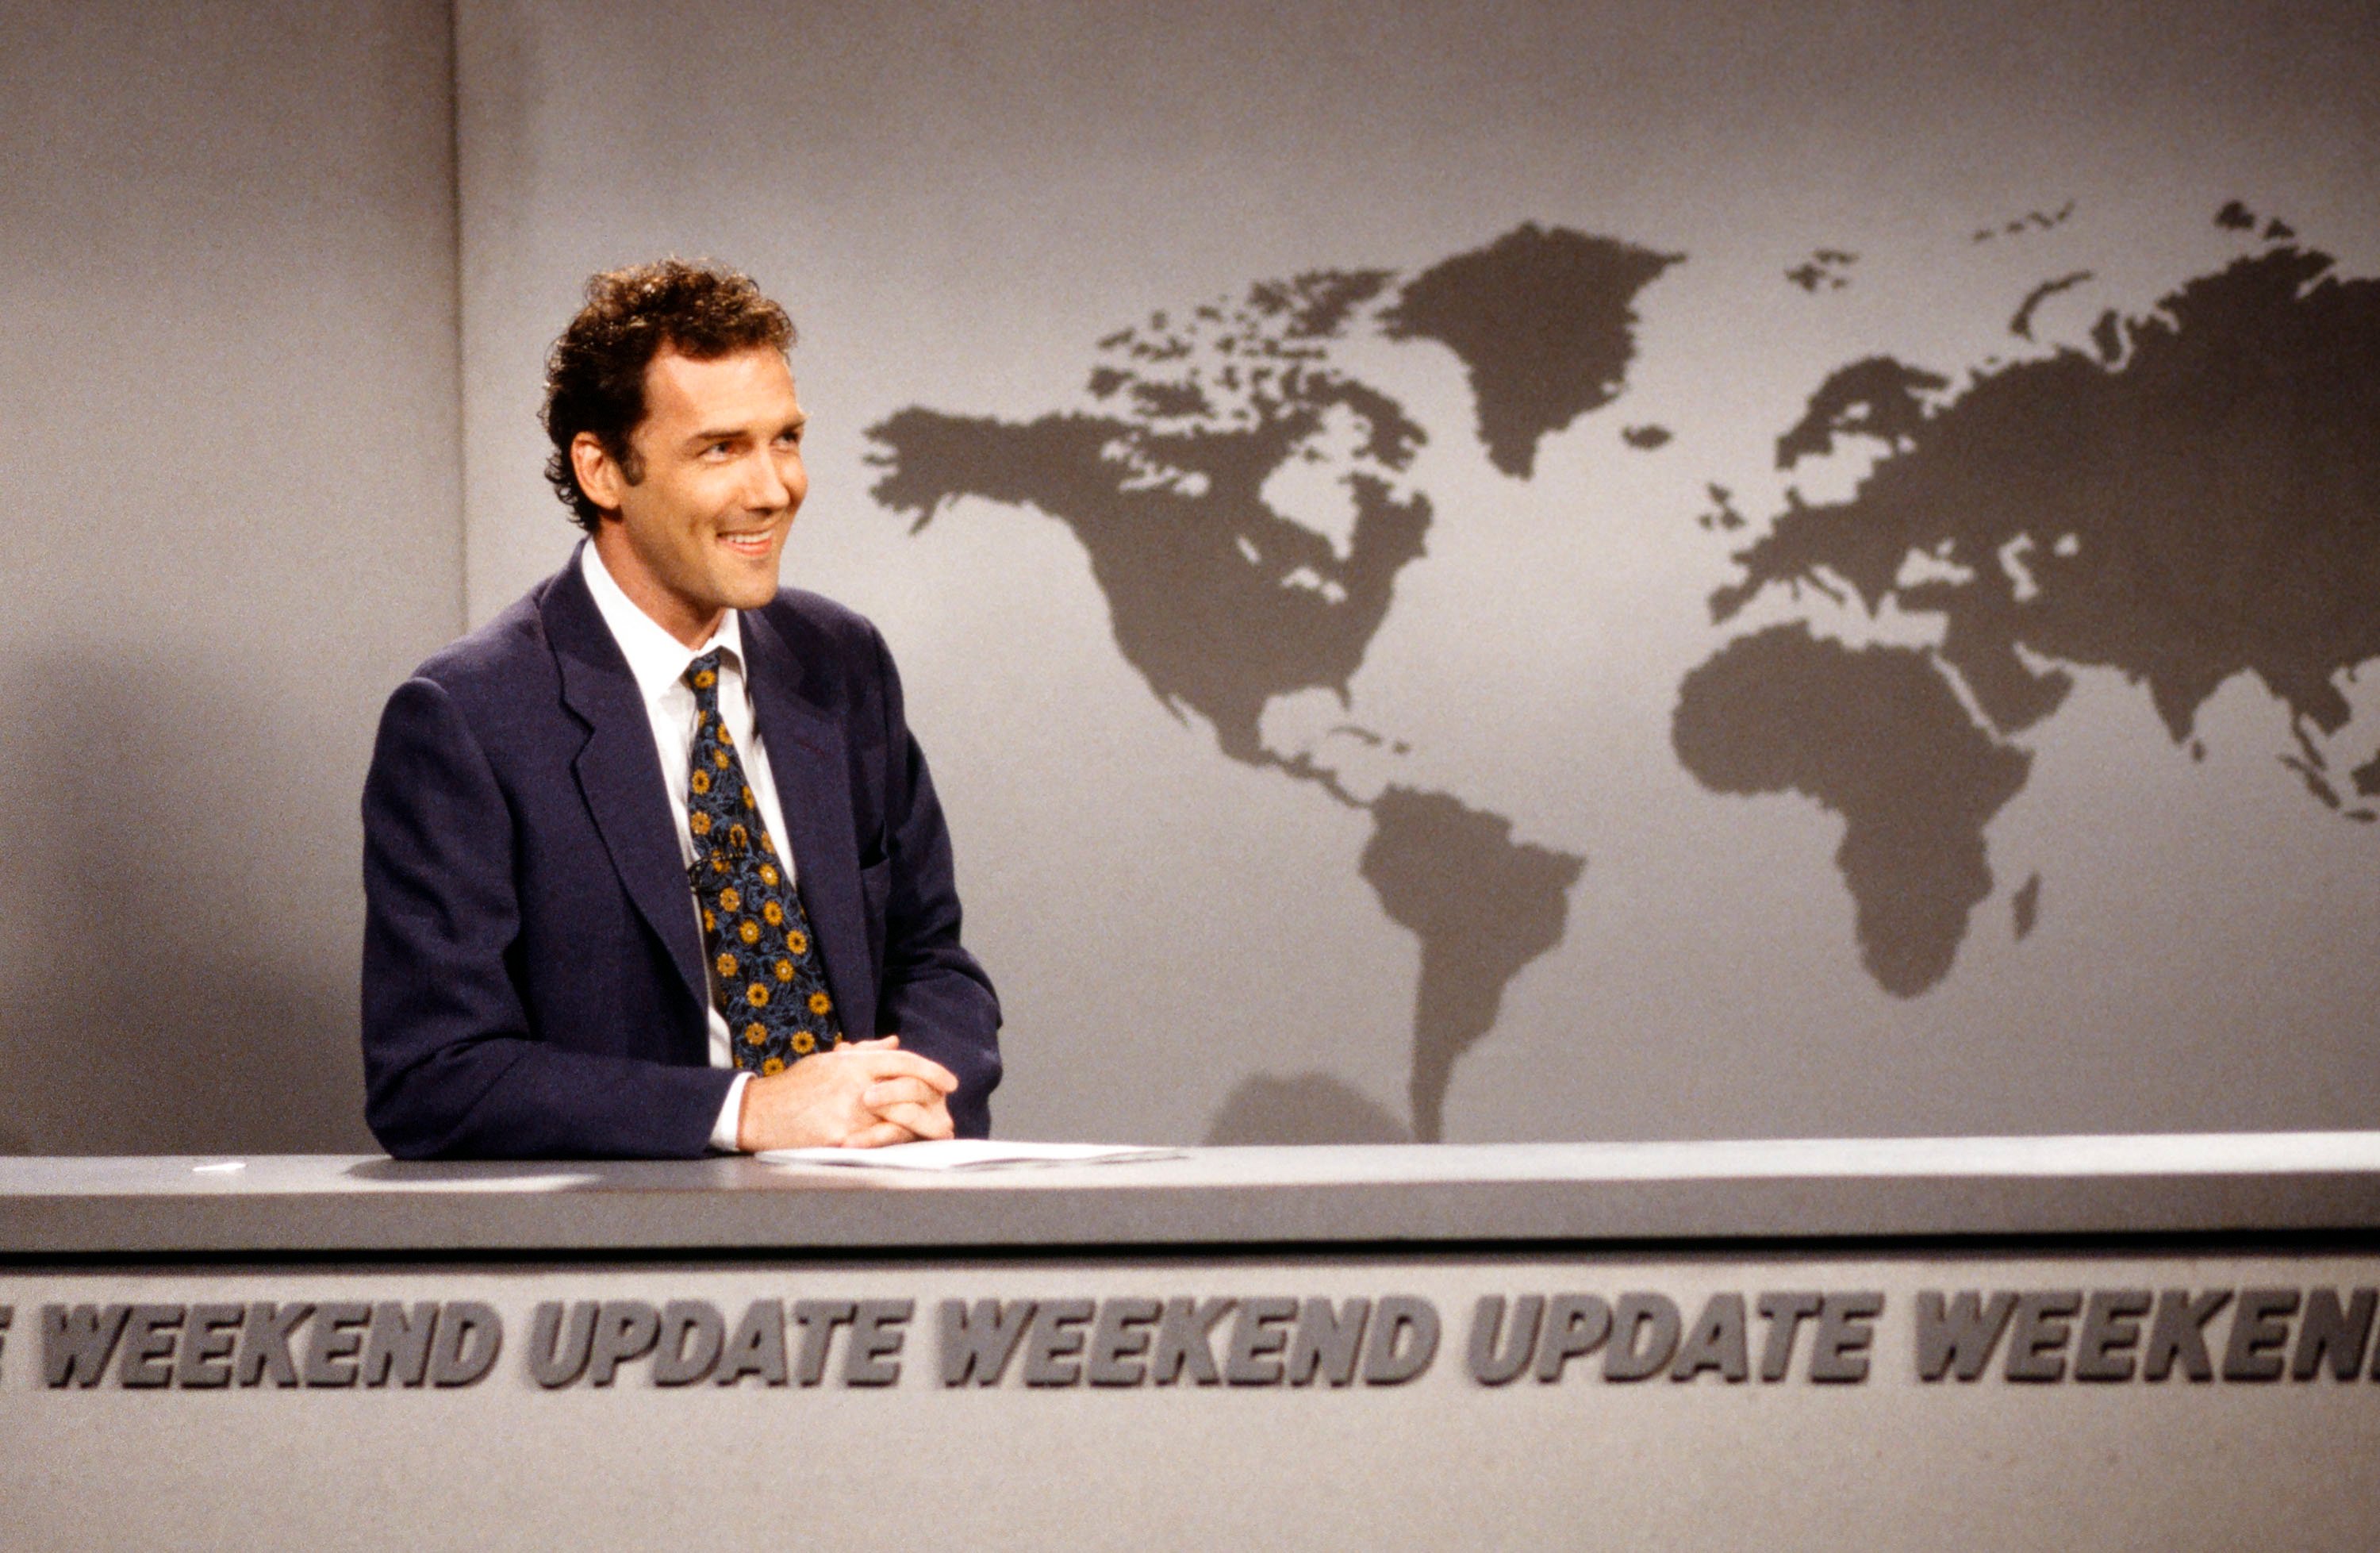 Saturday Night Live: Norm Macdonald sits at the Weekend Update desk